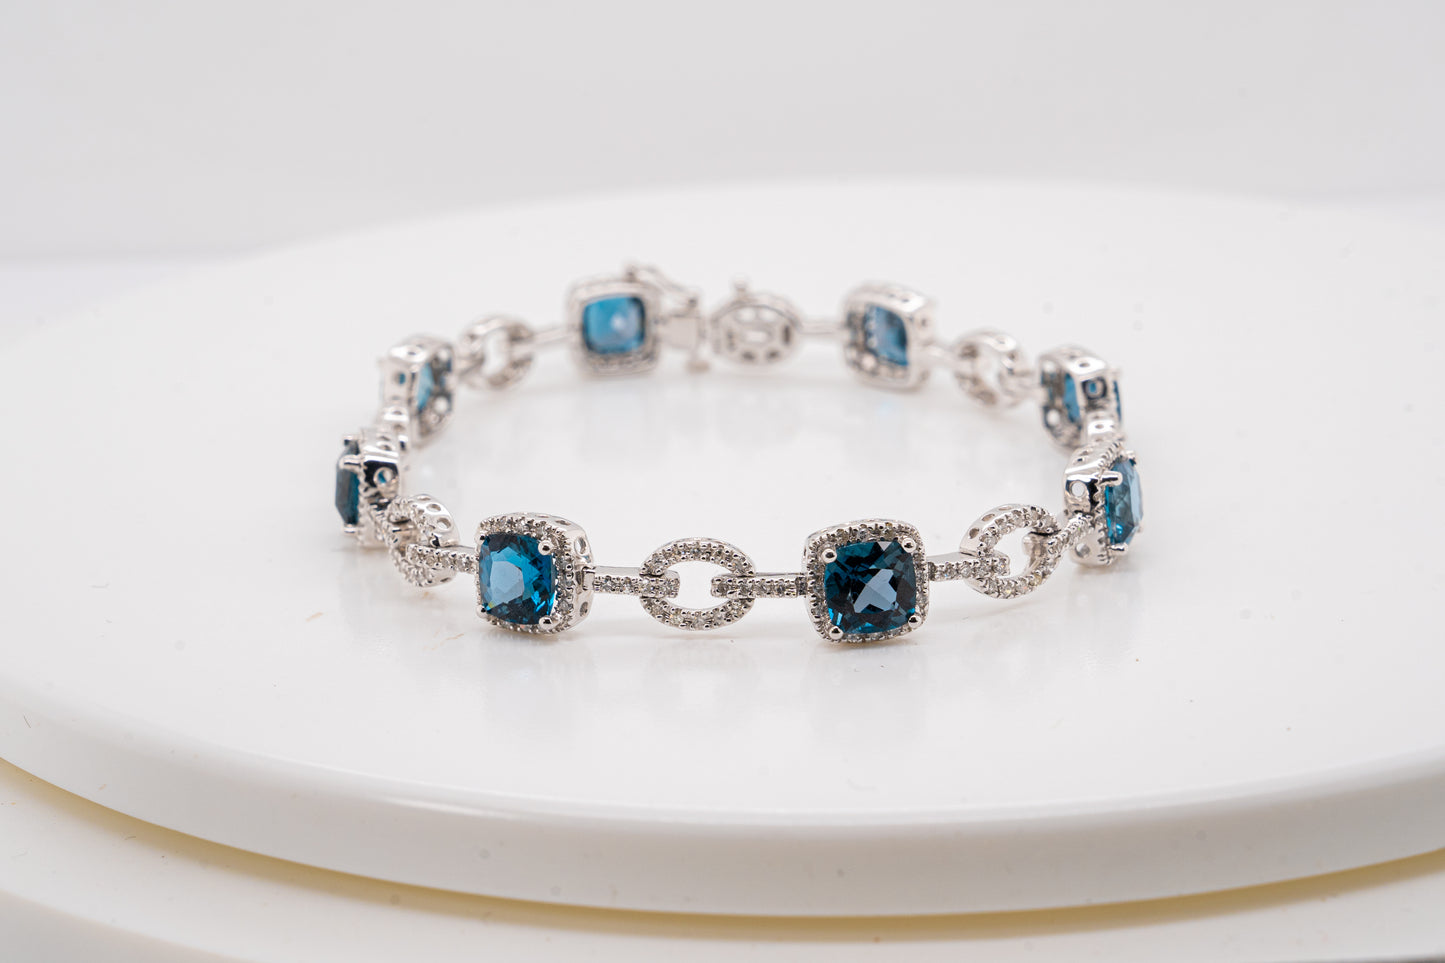 14K White Gold Bracelet with 9.80ct of Blue Topaz & 1.10ct of Natural Diamonds